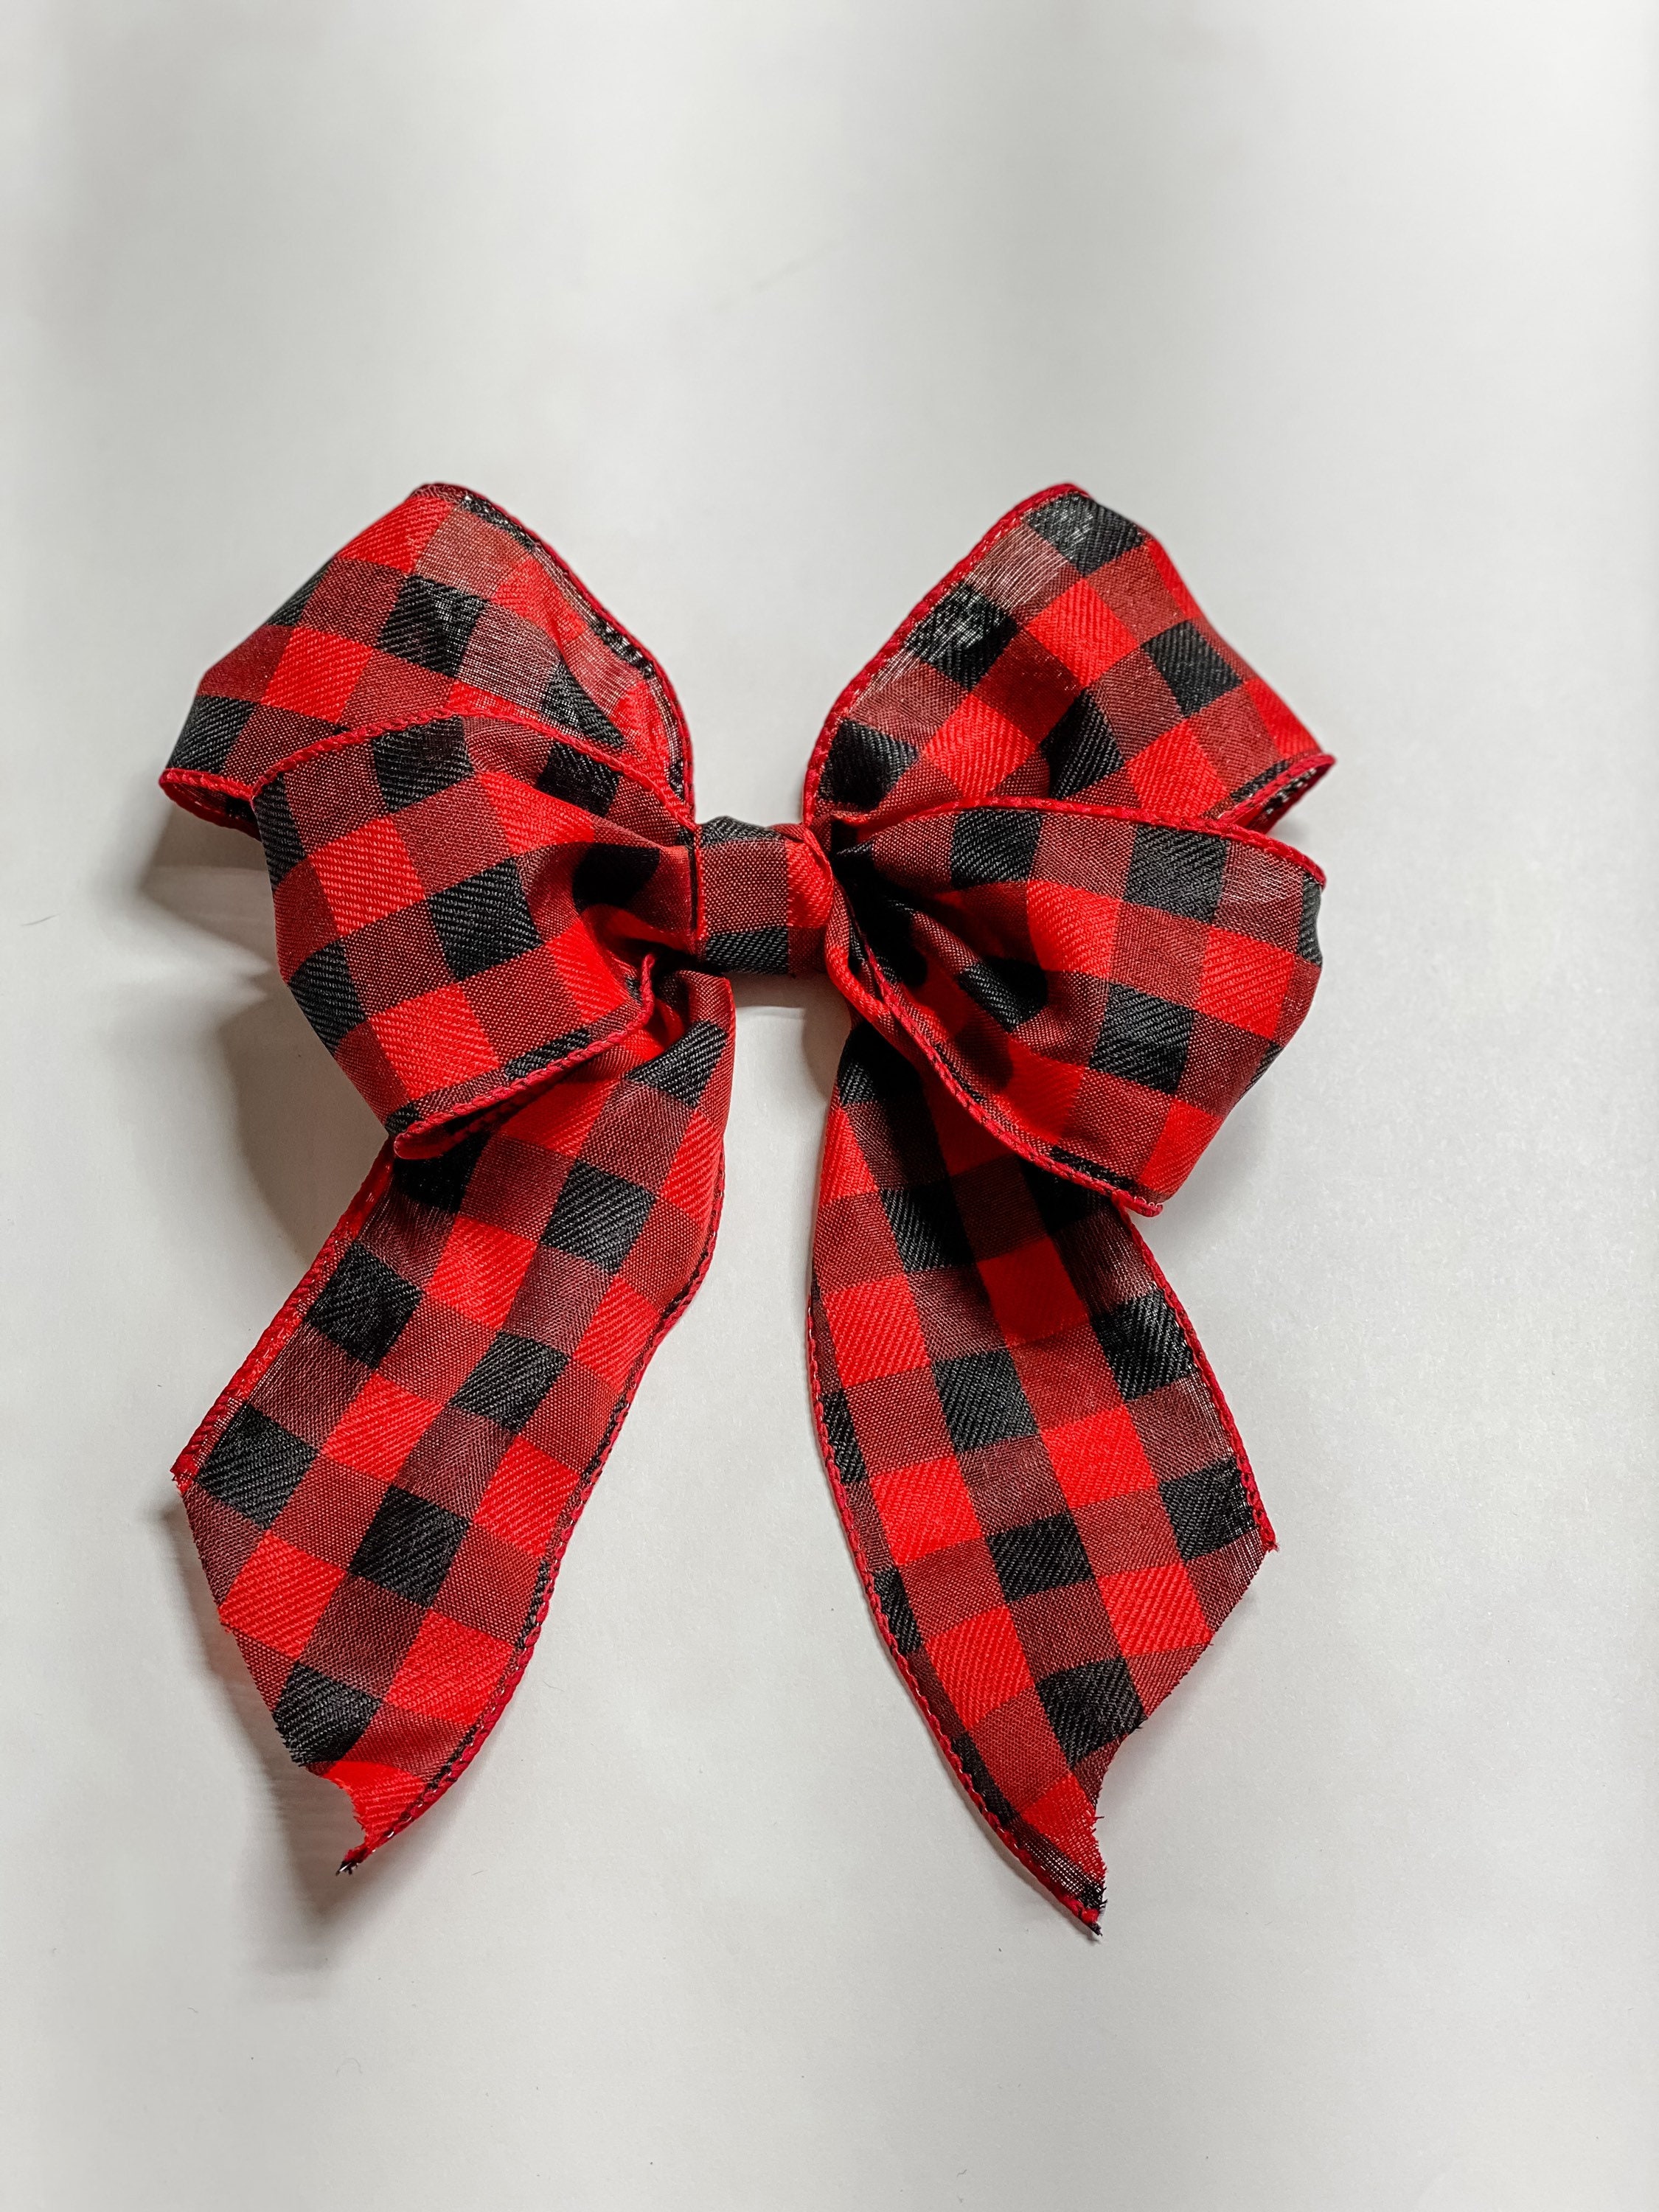 or Österreich Bow Gift - Plaid Signs Buffalo Add Etsy or for On Red / Wreaths Present Loop Double Black for Bow